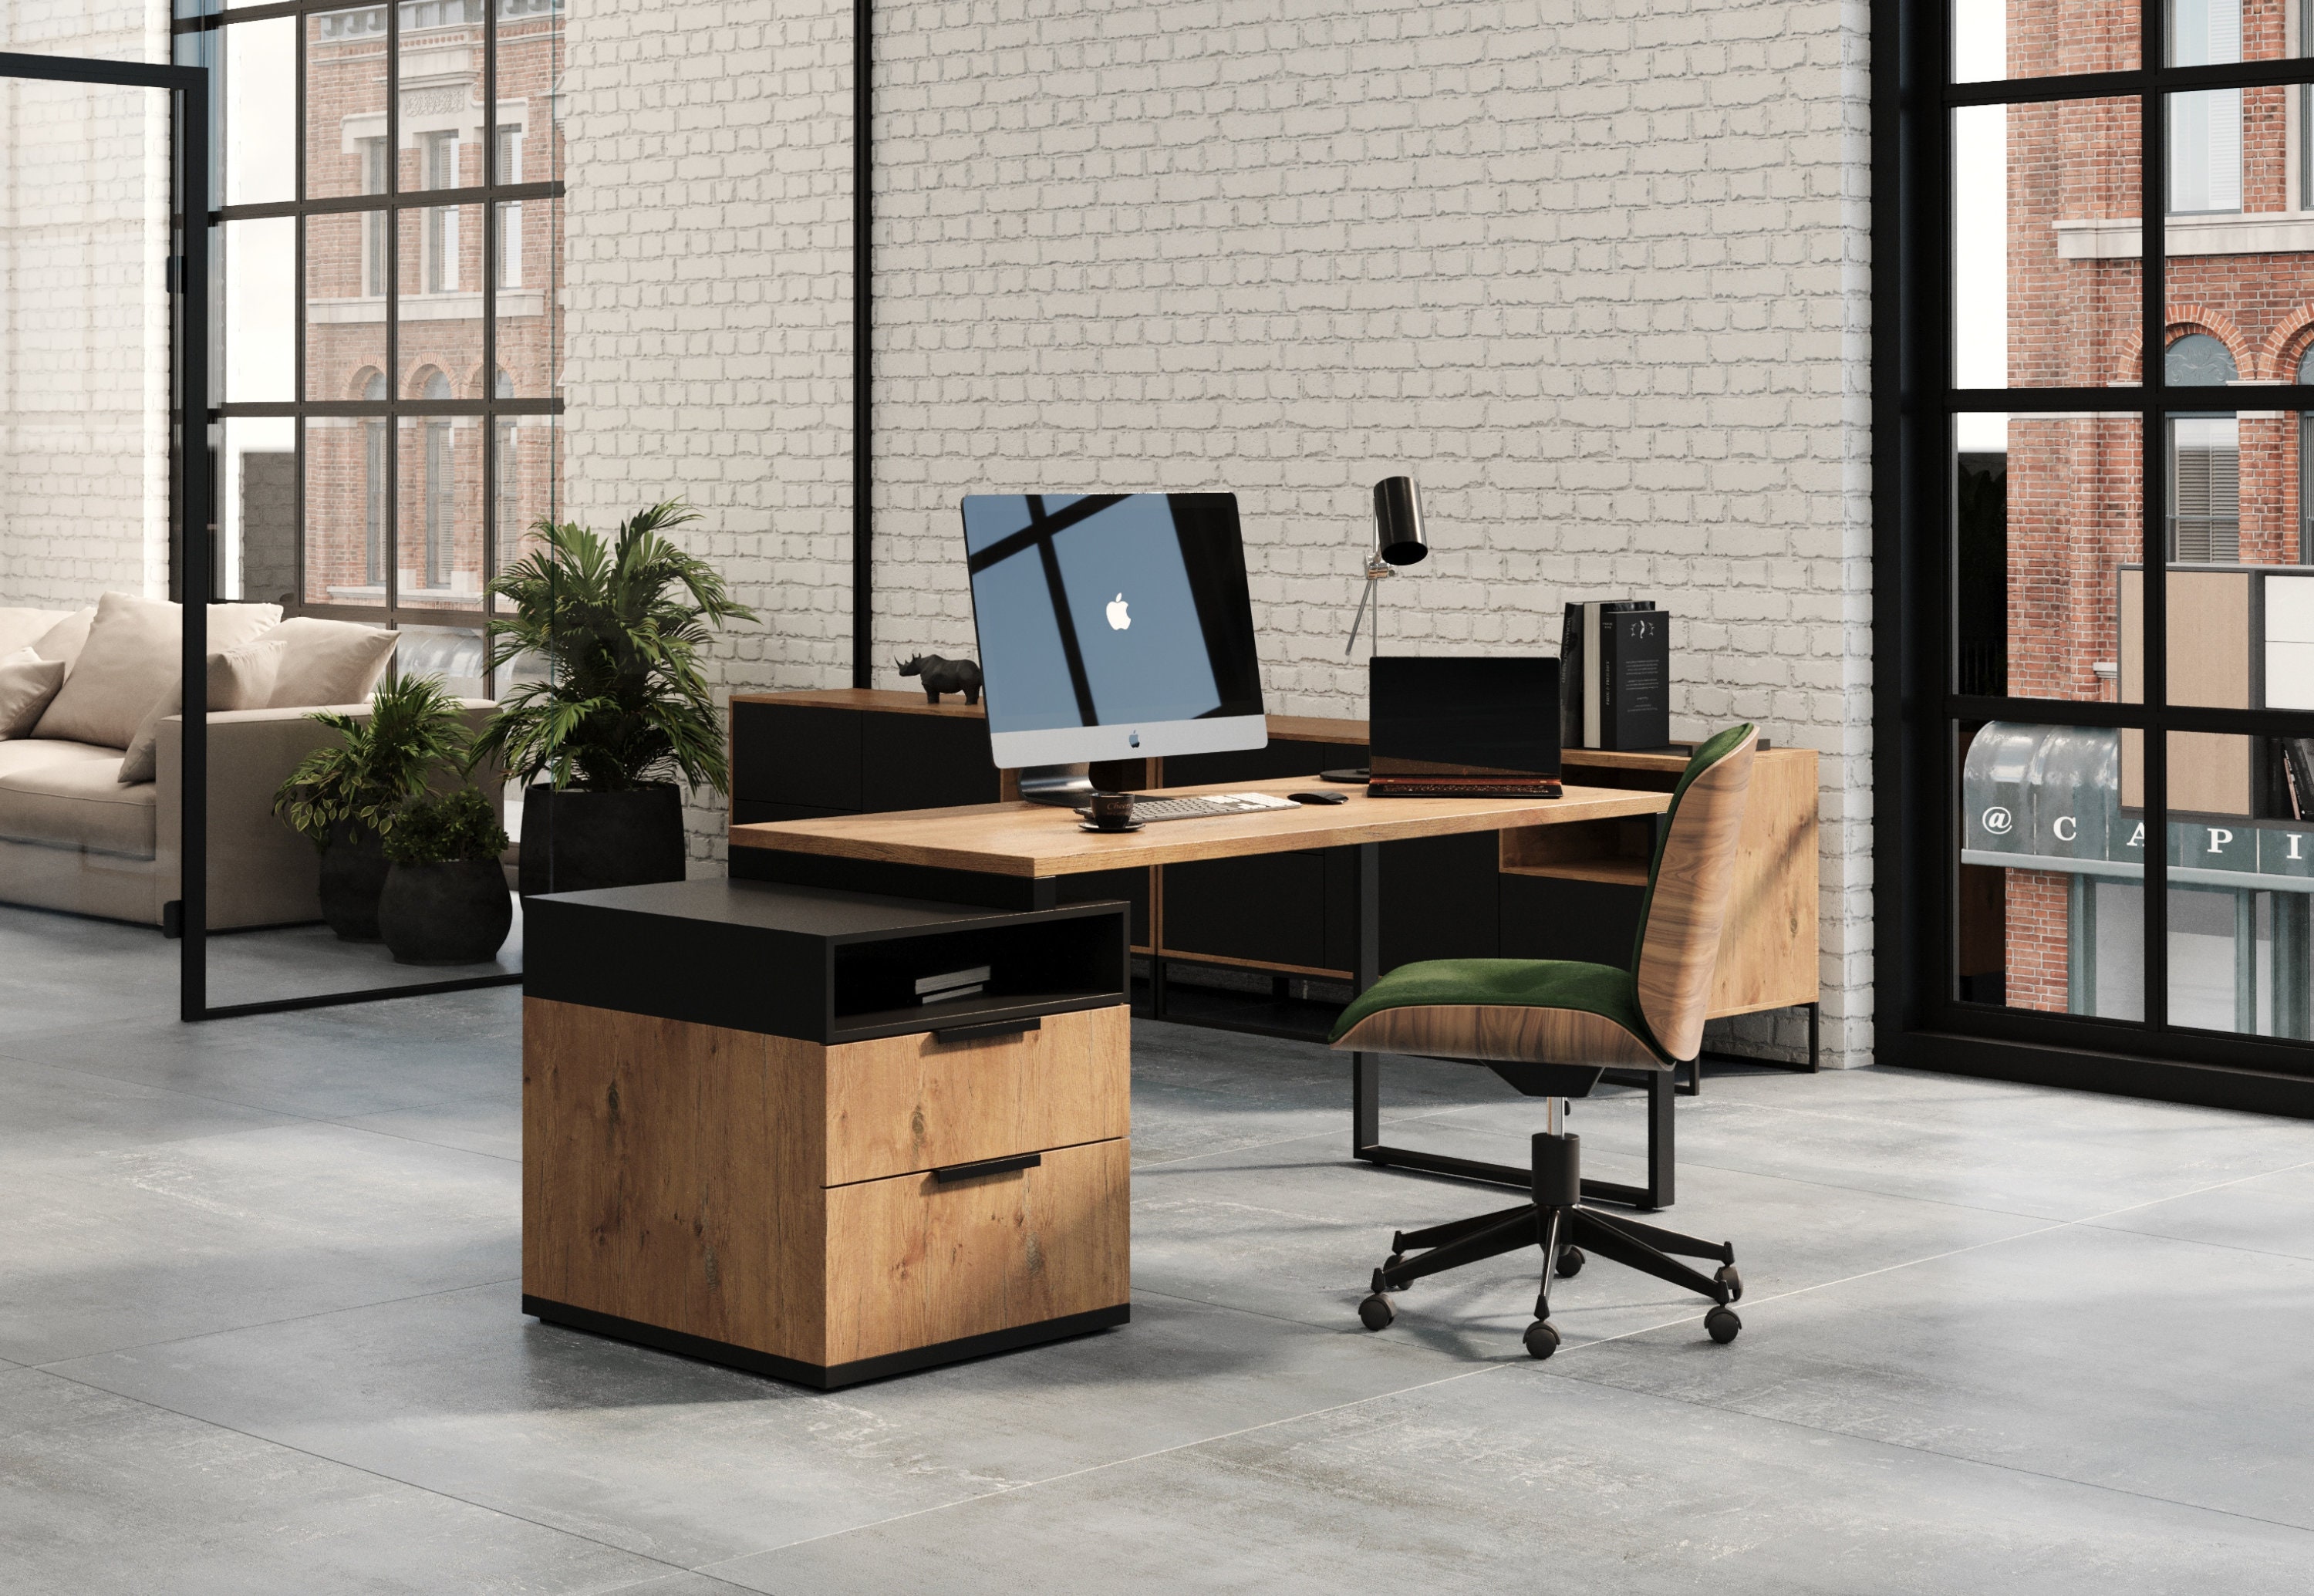 Large Desk With Container / Home Office Desk With Drawers / Rustic